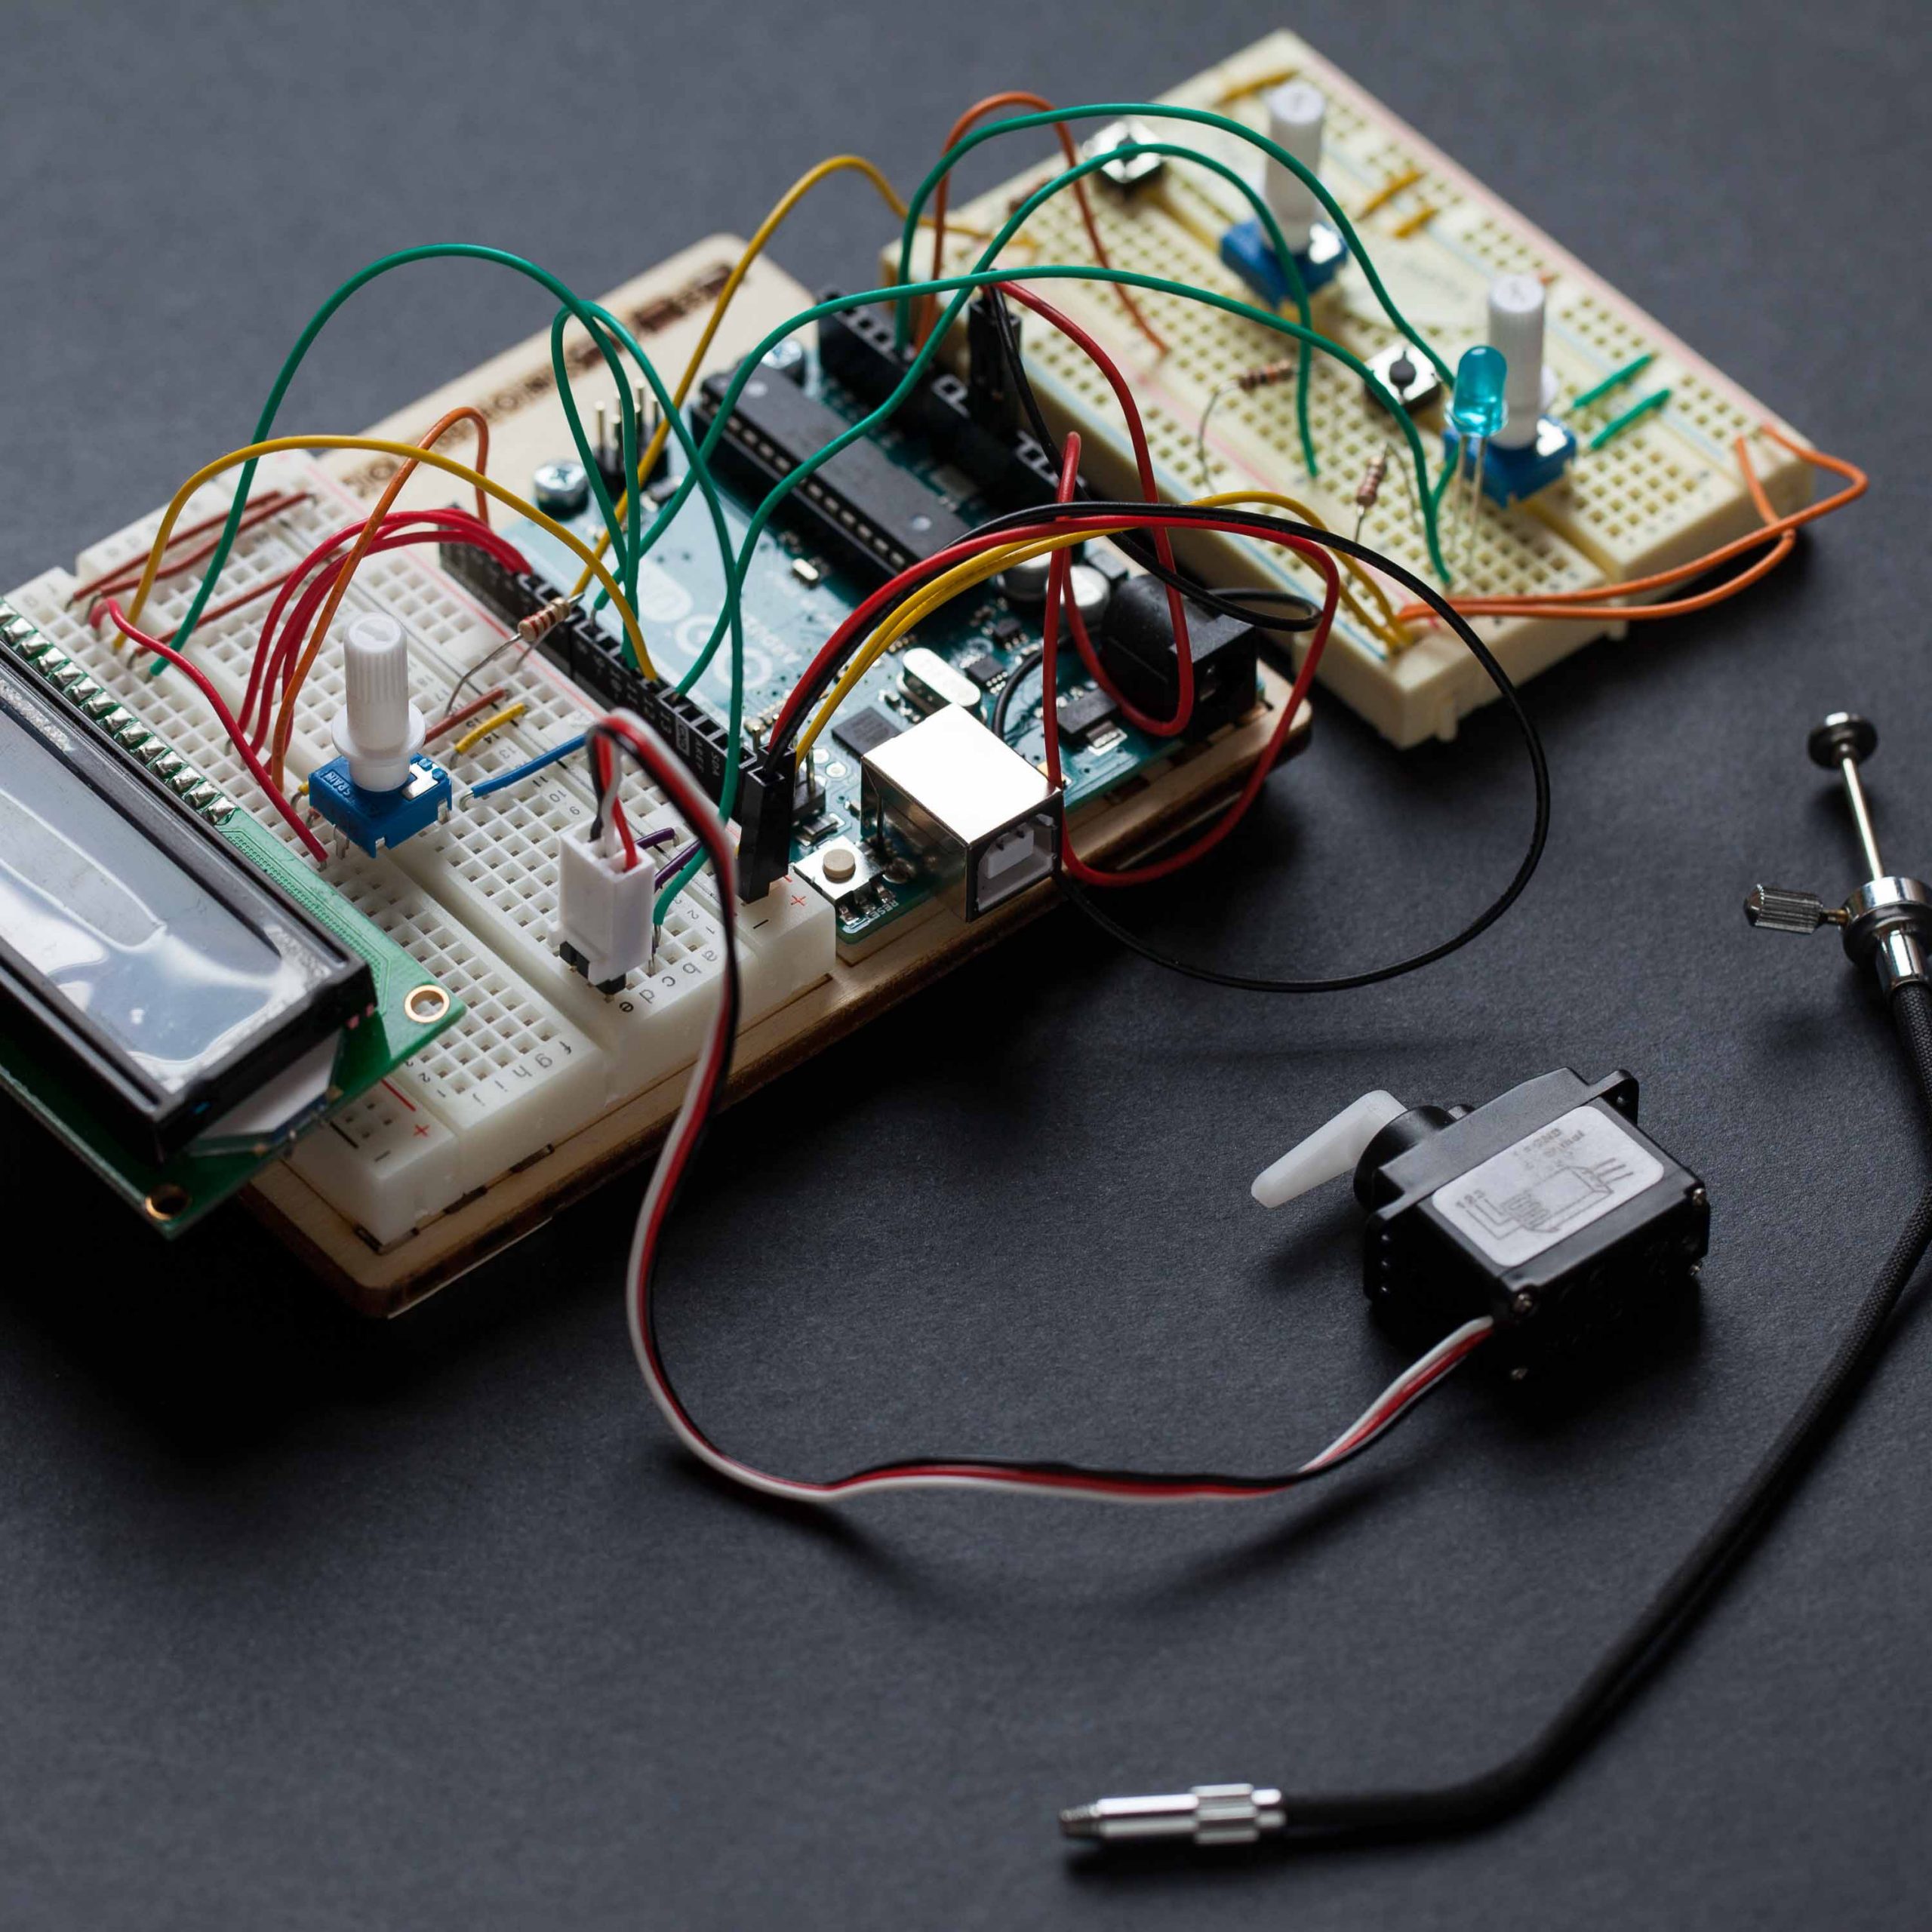 Read more about the article Physical Computing Fun